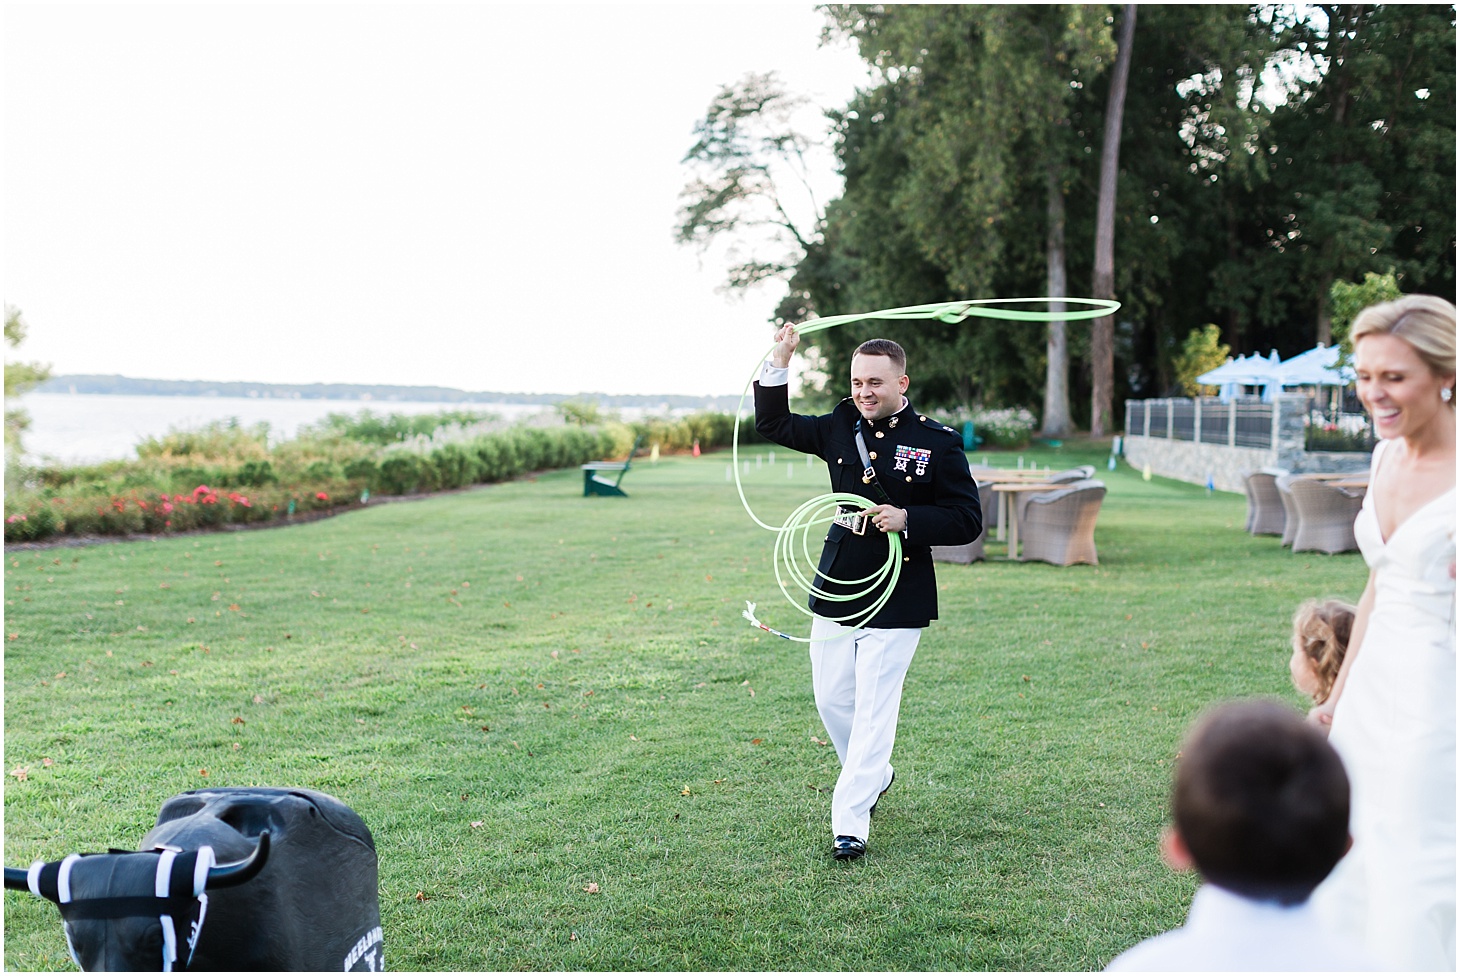 Gibson Island Club Wedding Reception in Annapolis, MD | Southern Magnolia Wedding at the Naval Academy and Gibson Island Club | Sarah Bradshaw Photography